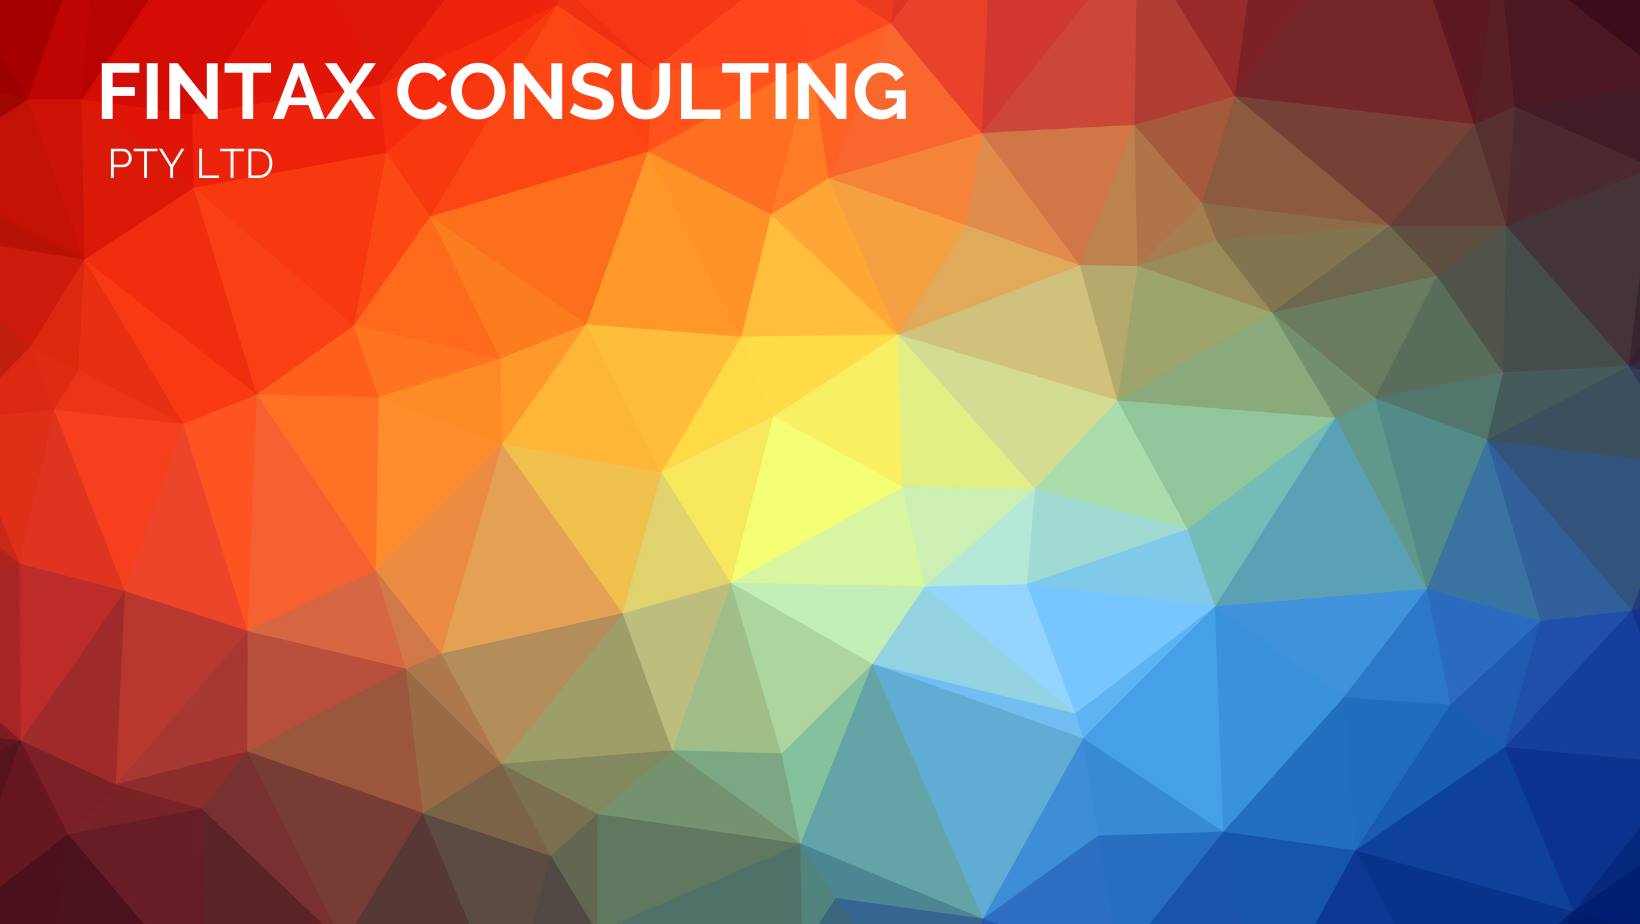 Fintax consulting Pty ltd